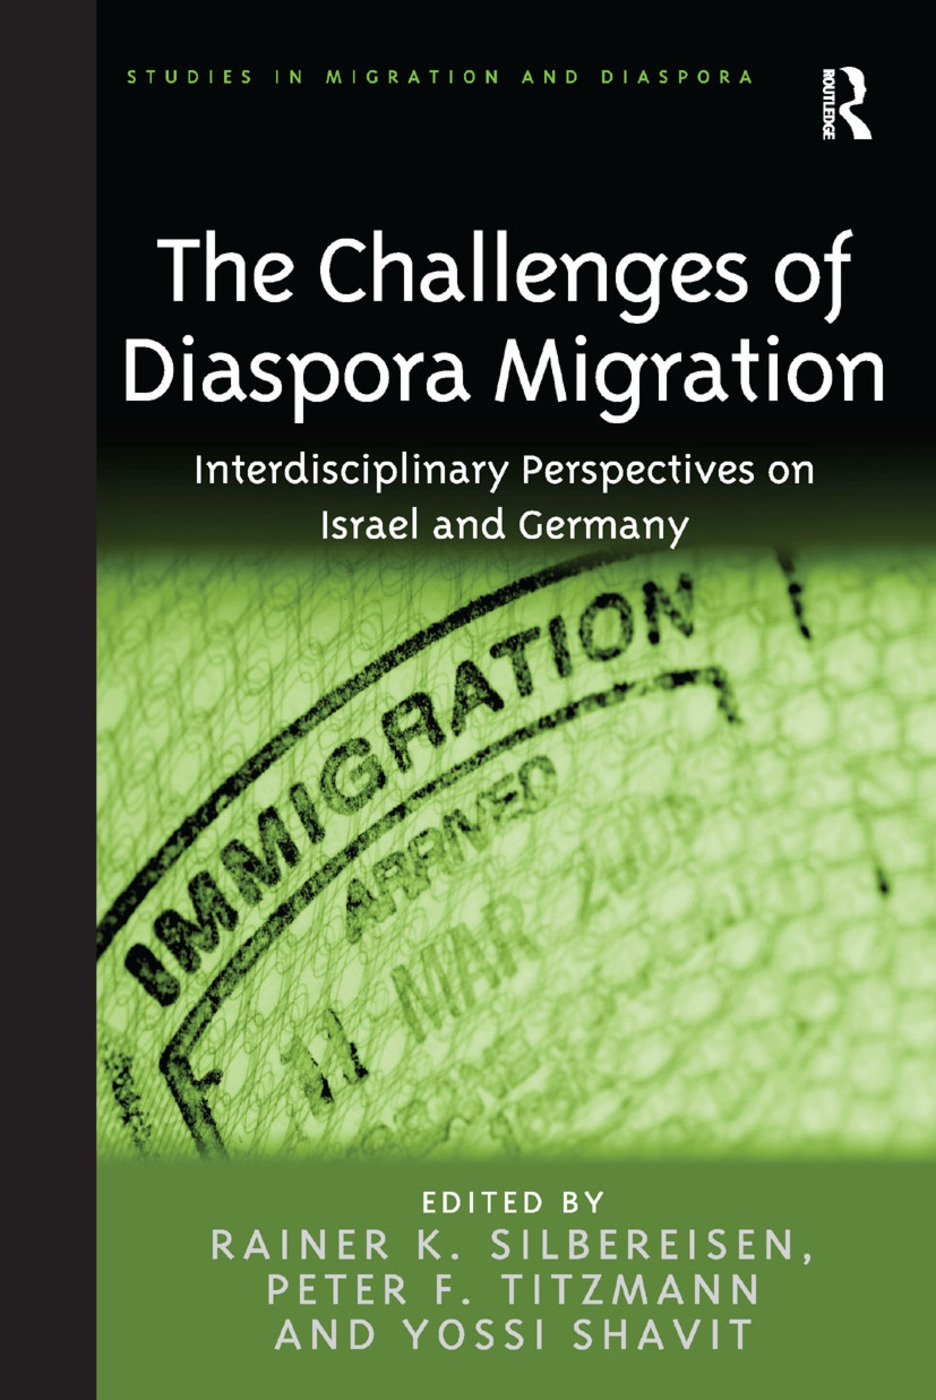 The Challenges of Diaspora Migration: Interdisciplinary Perspectives on Israel and Germany. Edited by Rainer K. Silbereisen, Peter F. Titzmann and Yos